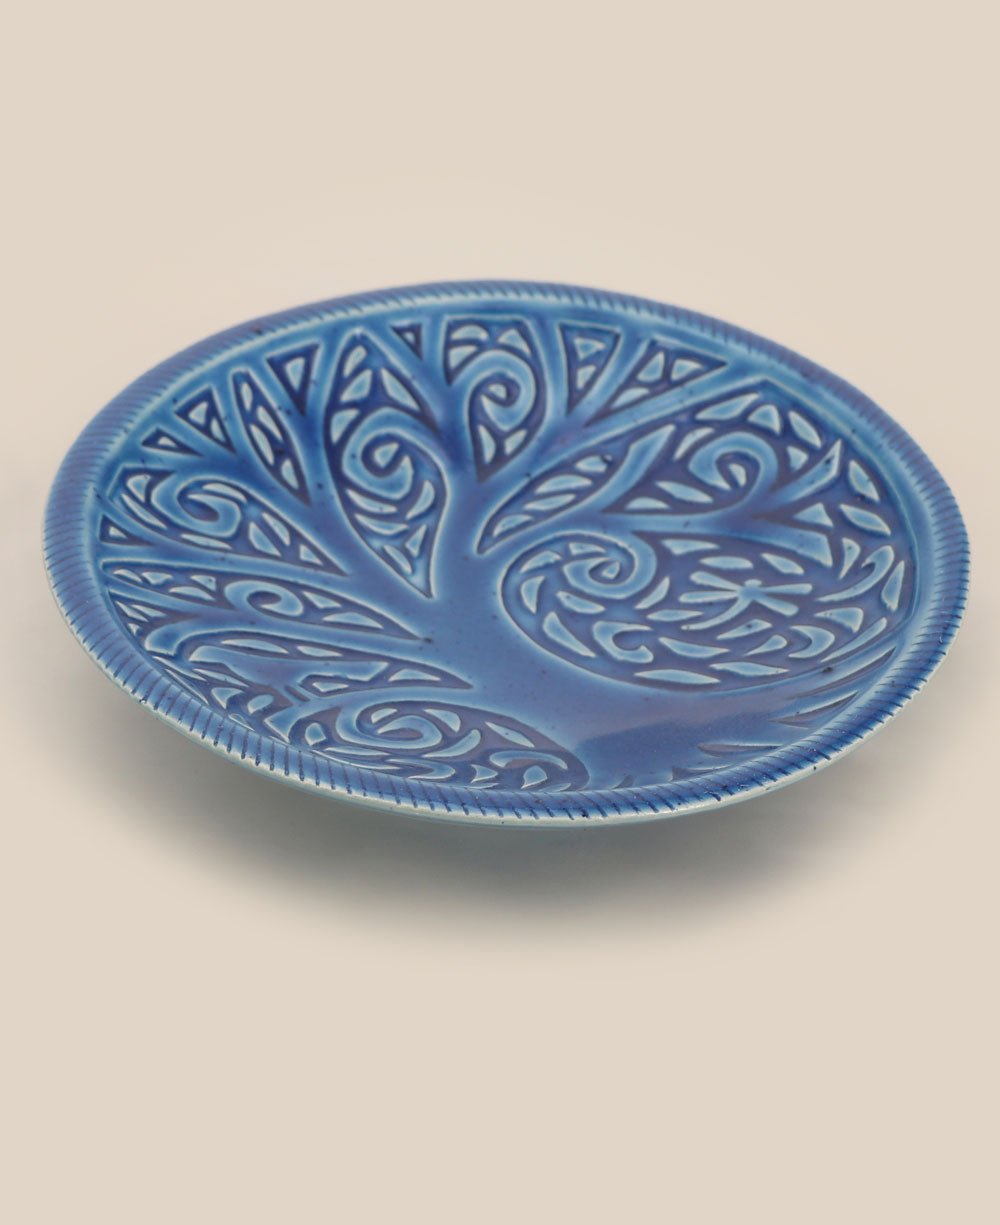 Tree of Life Earthenware Ceramic Dish, Multipurpose Catch-All Bowl or Wall Hanging Decor - Posters, Prints, & Visual Artwork Blue